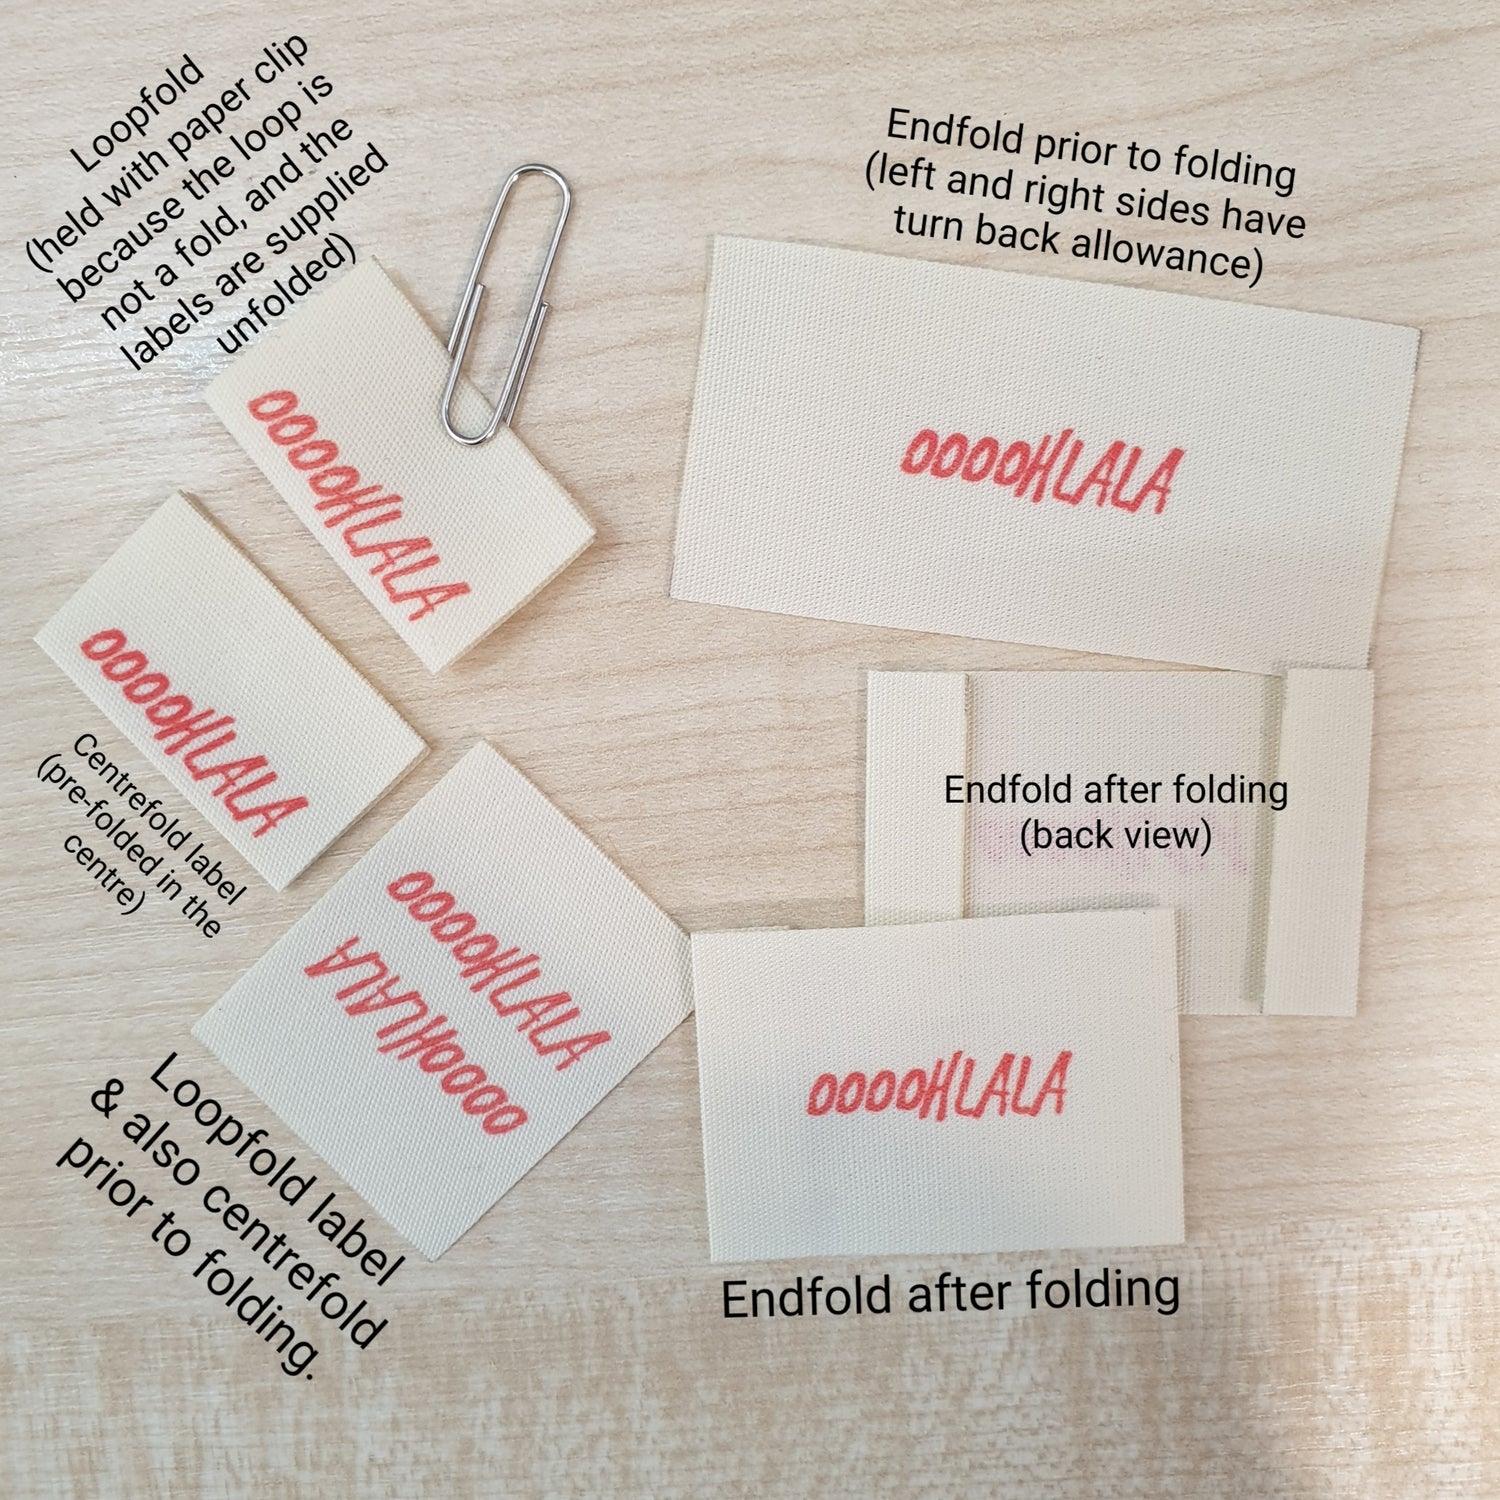 Workroom Labels by Shelley & Co. - Custom Fabric Labels for Clothing